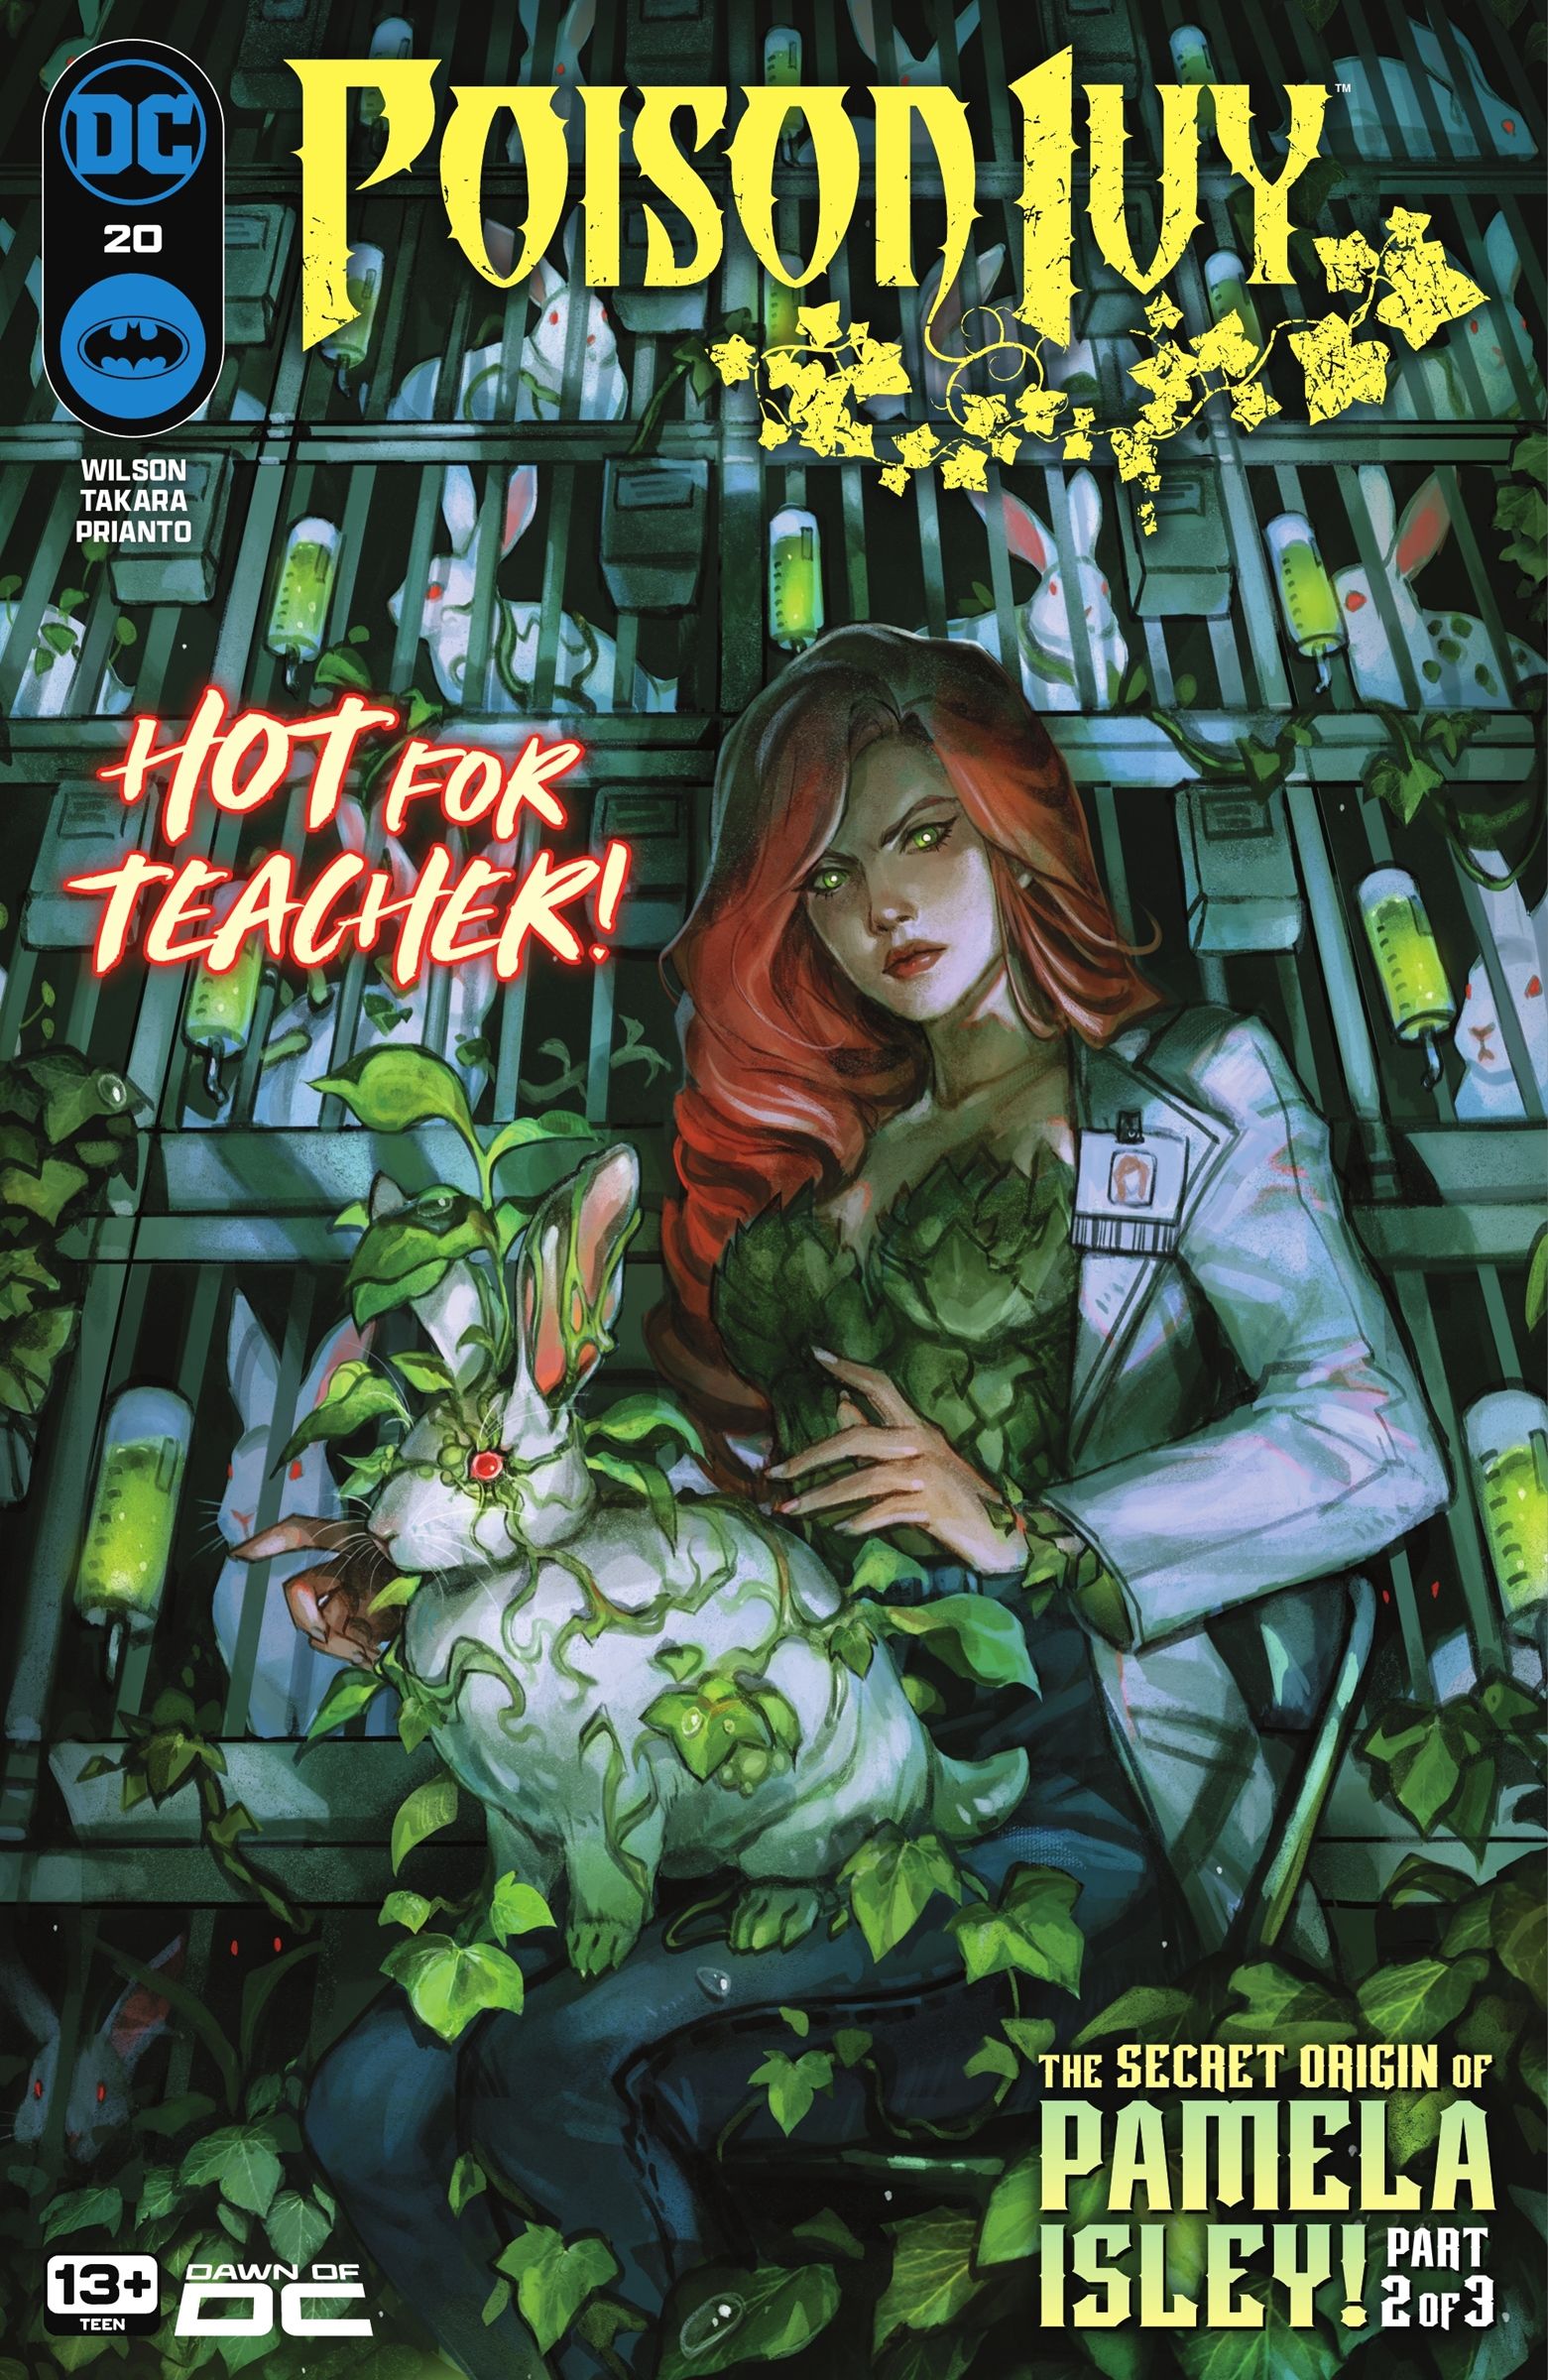 Poison Ivy 20 Main Cover: Pamela Isley pictured in front of laboratory rabbits with vines surrounding them